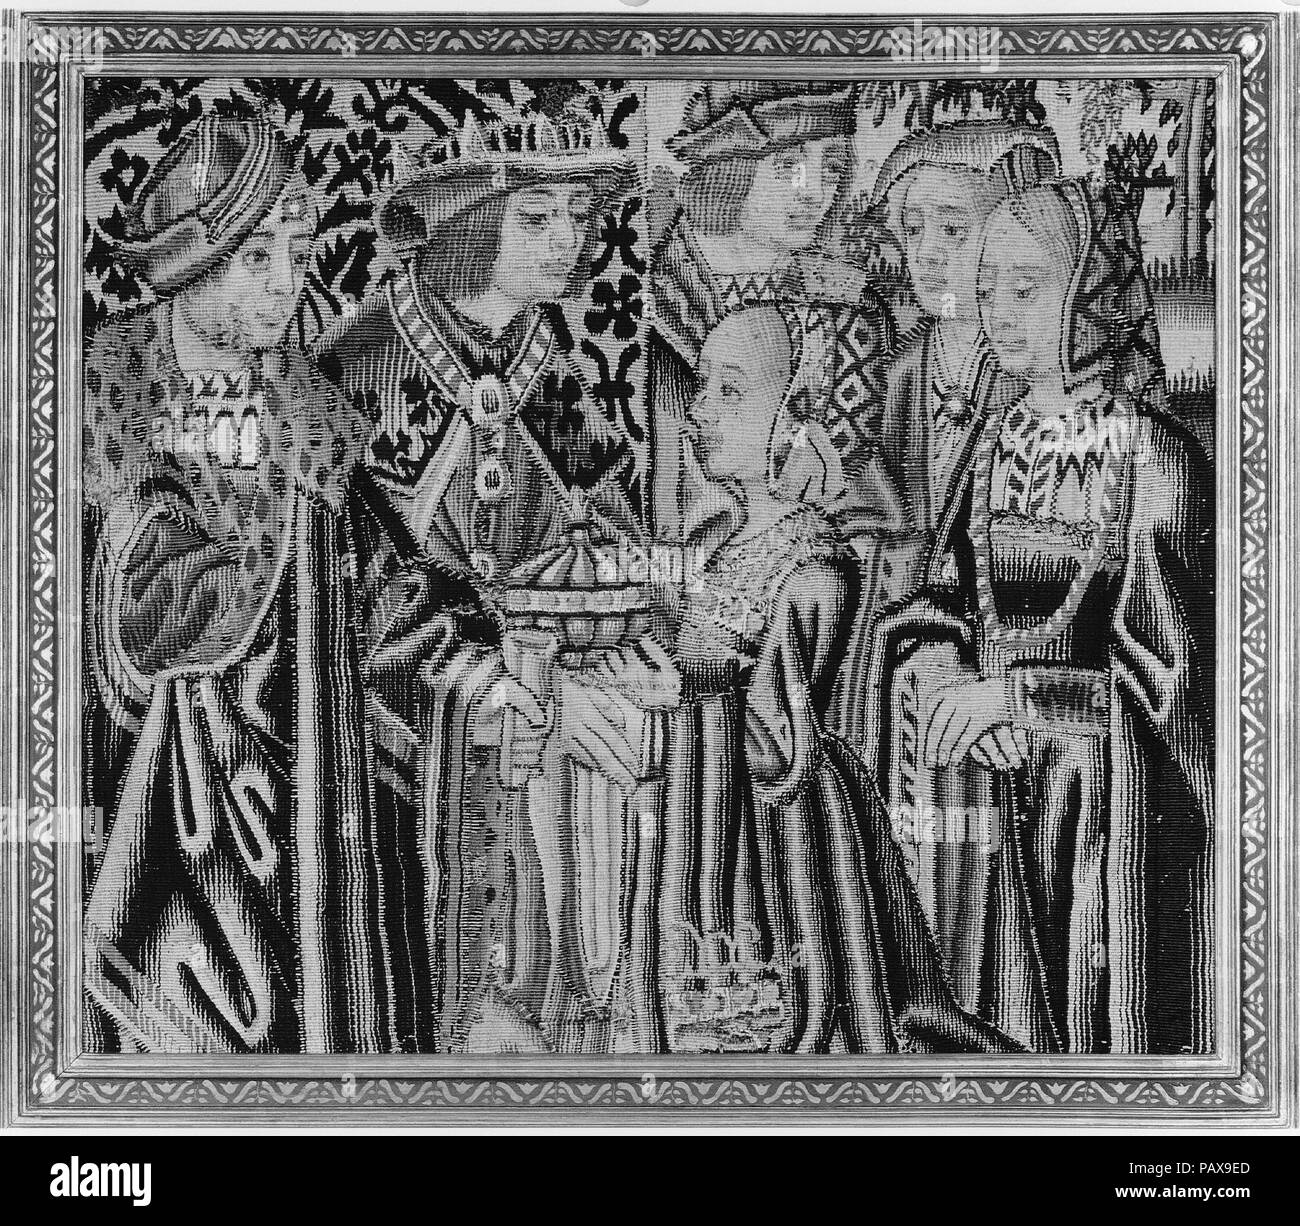 Courtly Scenes. Culture: South Netherlandish. Dimensions: Overall: 27 7/8 x 25 5/8in. (70.8 x 65.1cm). Date: ca. 1510-25. Museum: Metropolitan Museum of Art, New York, USA. Stock Photo